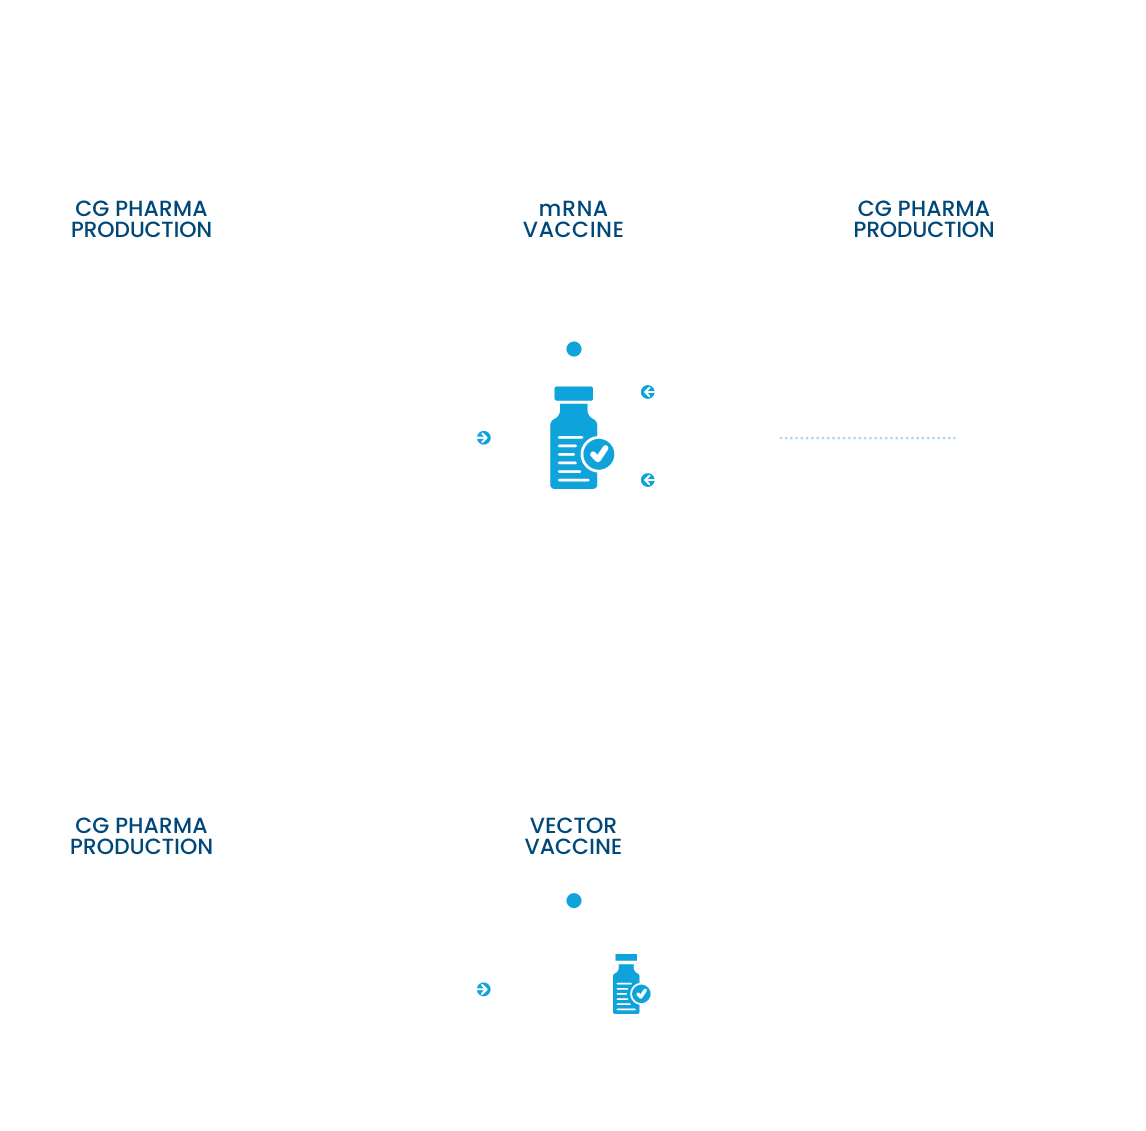 CG IS A SYSTEMRELEVANT SUPPLIER FOR COVID-19 VACCINES